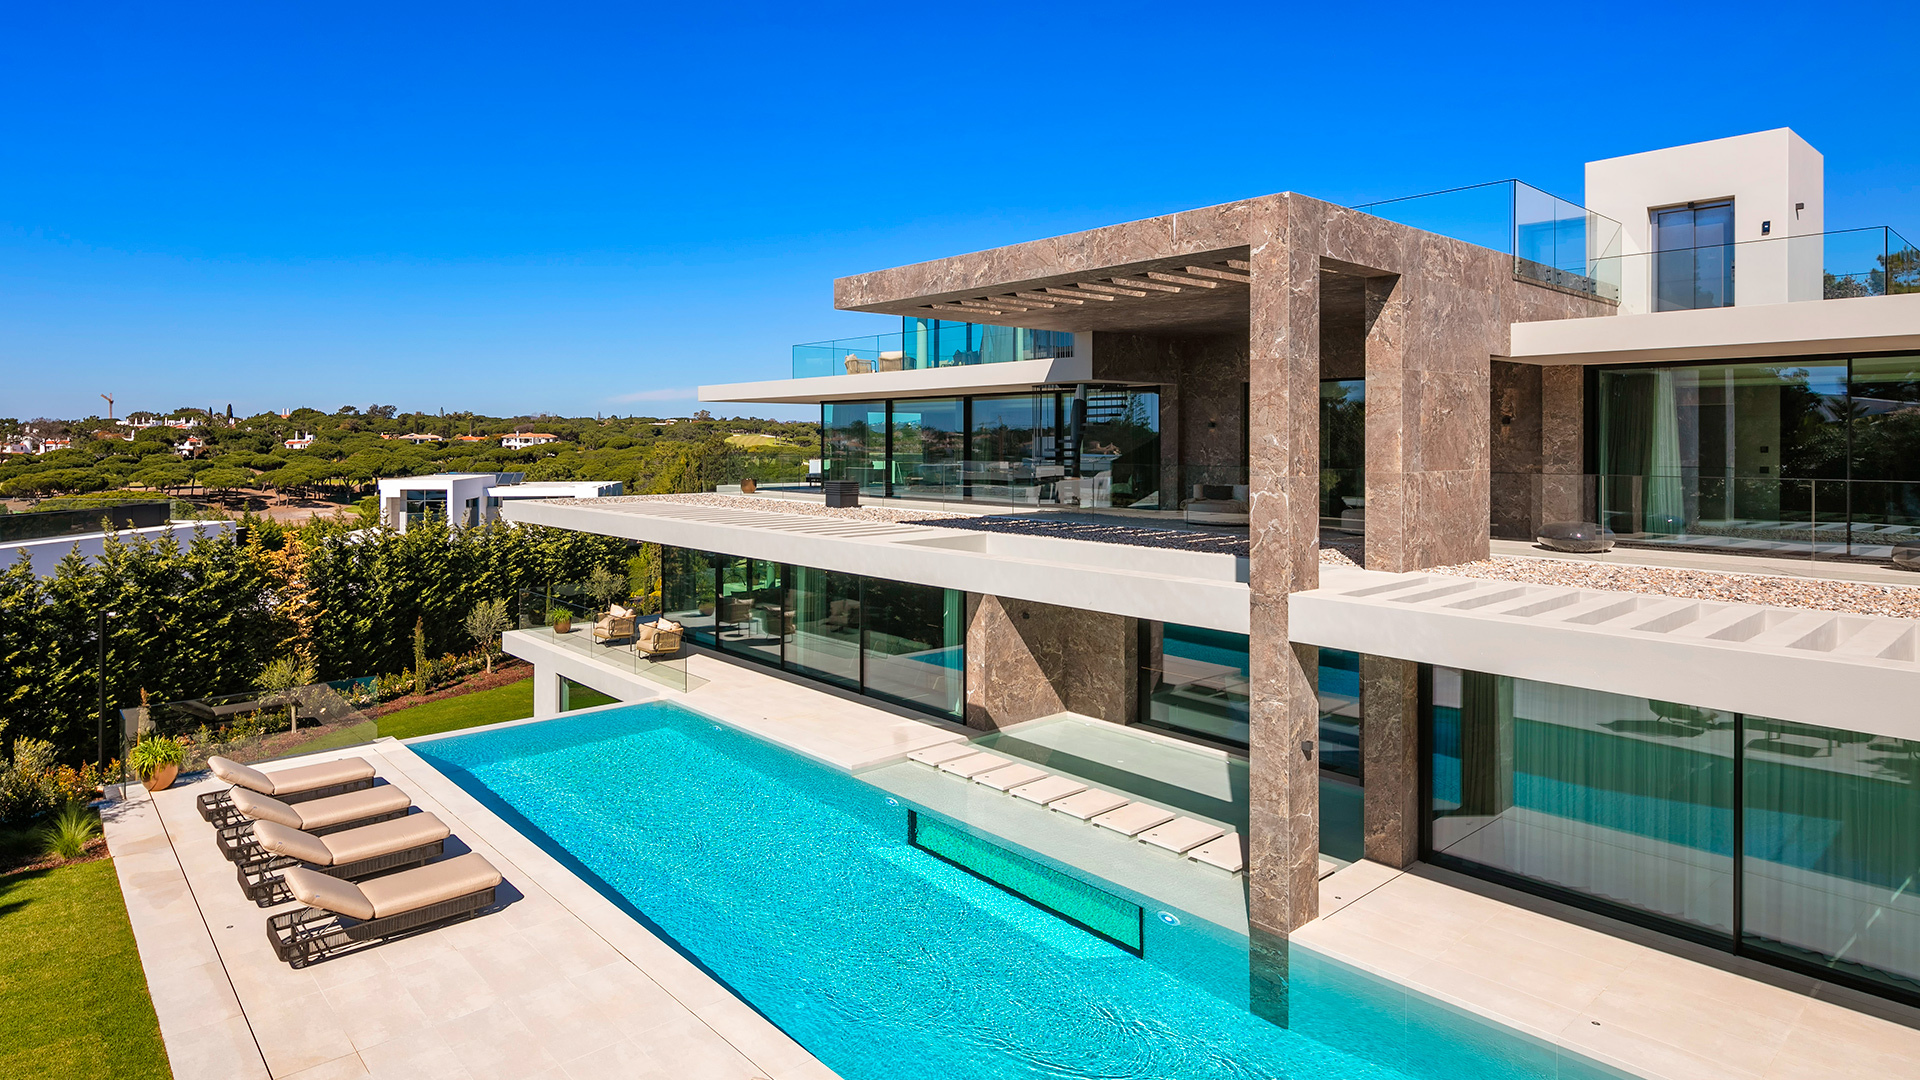 This extraordinary 7-bedroom villa is located within walking distance of the Quinta do Lago lake